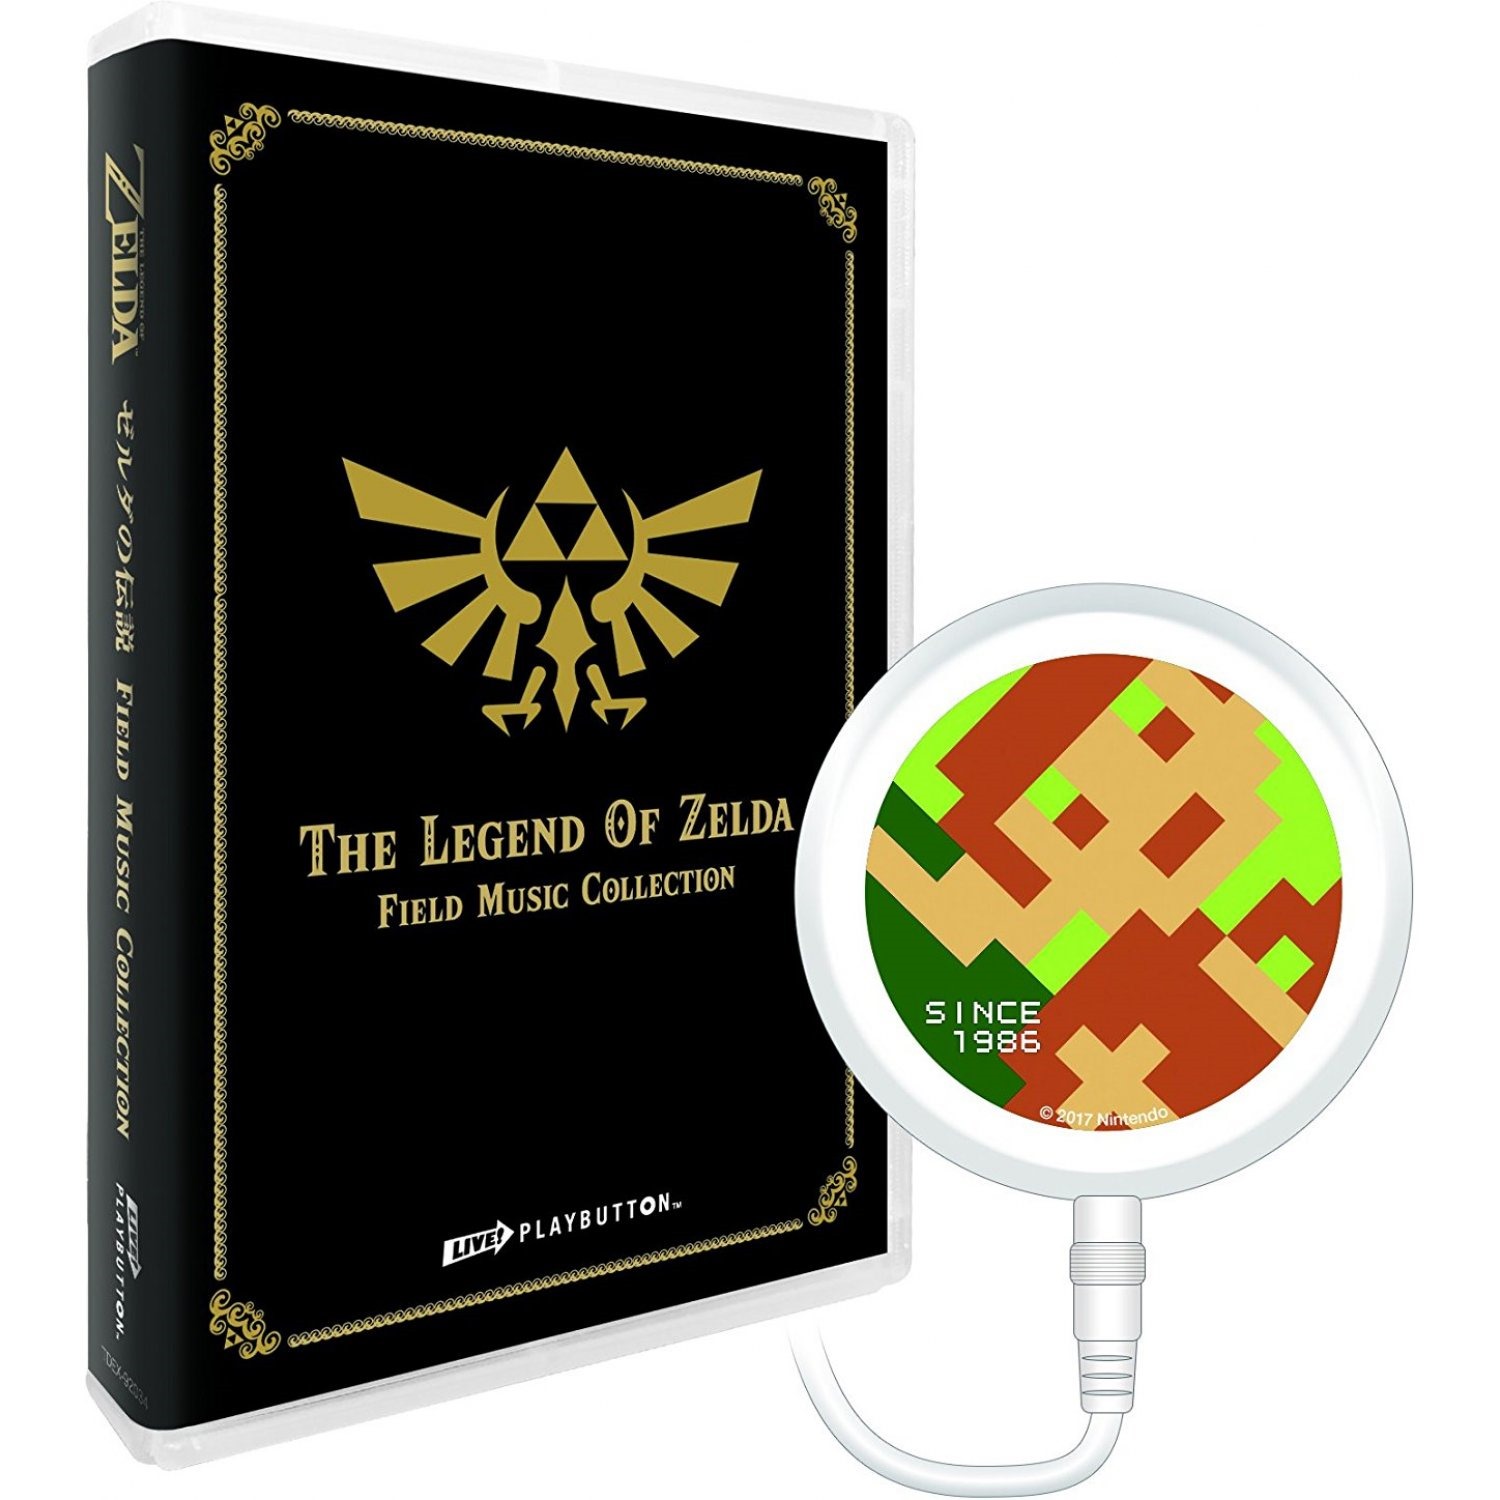 The Legend Of Zelda Breath Of The Wild Original Soundtrack Has Its Own Limited Edition Siliconera - roblox id code for legend of zelda parody